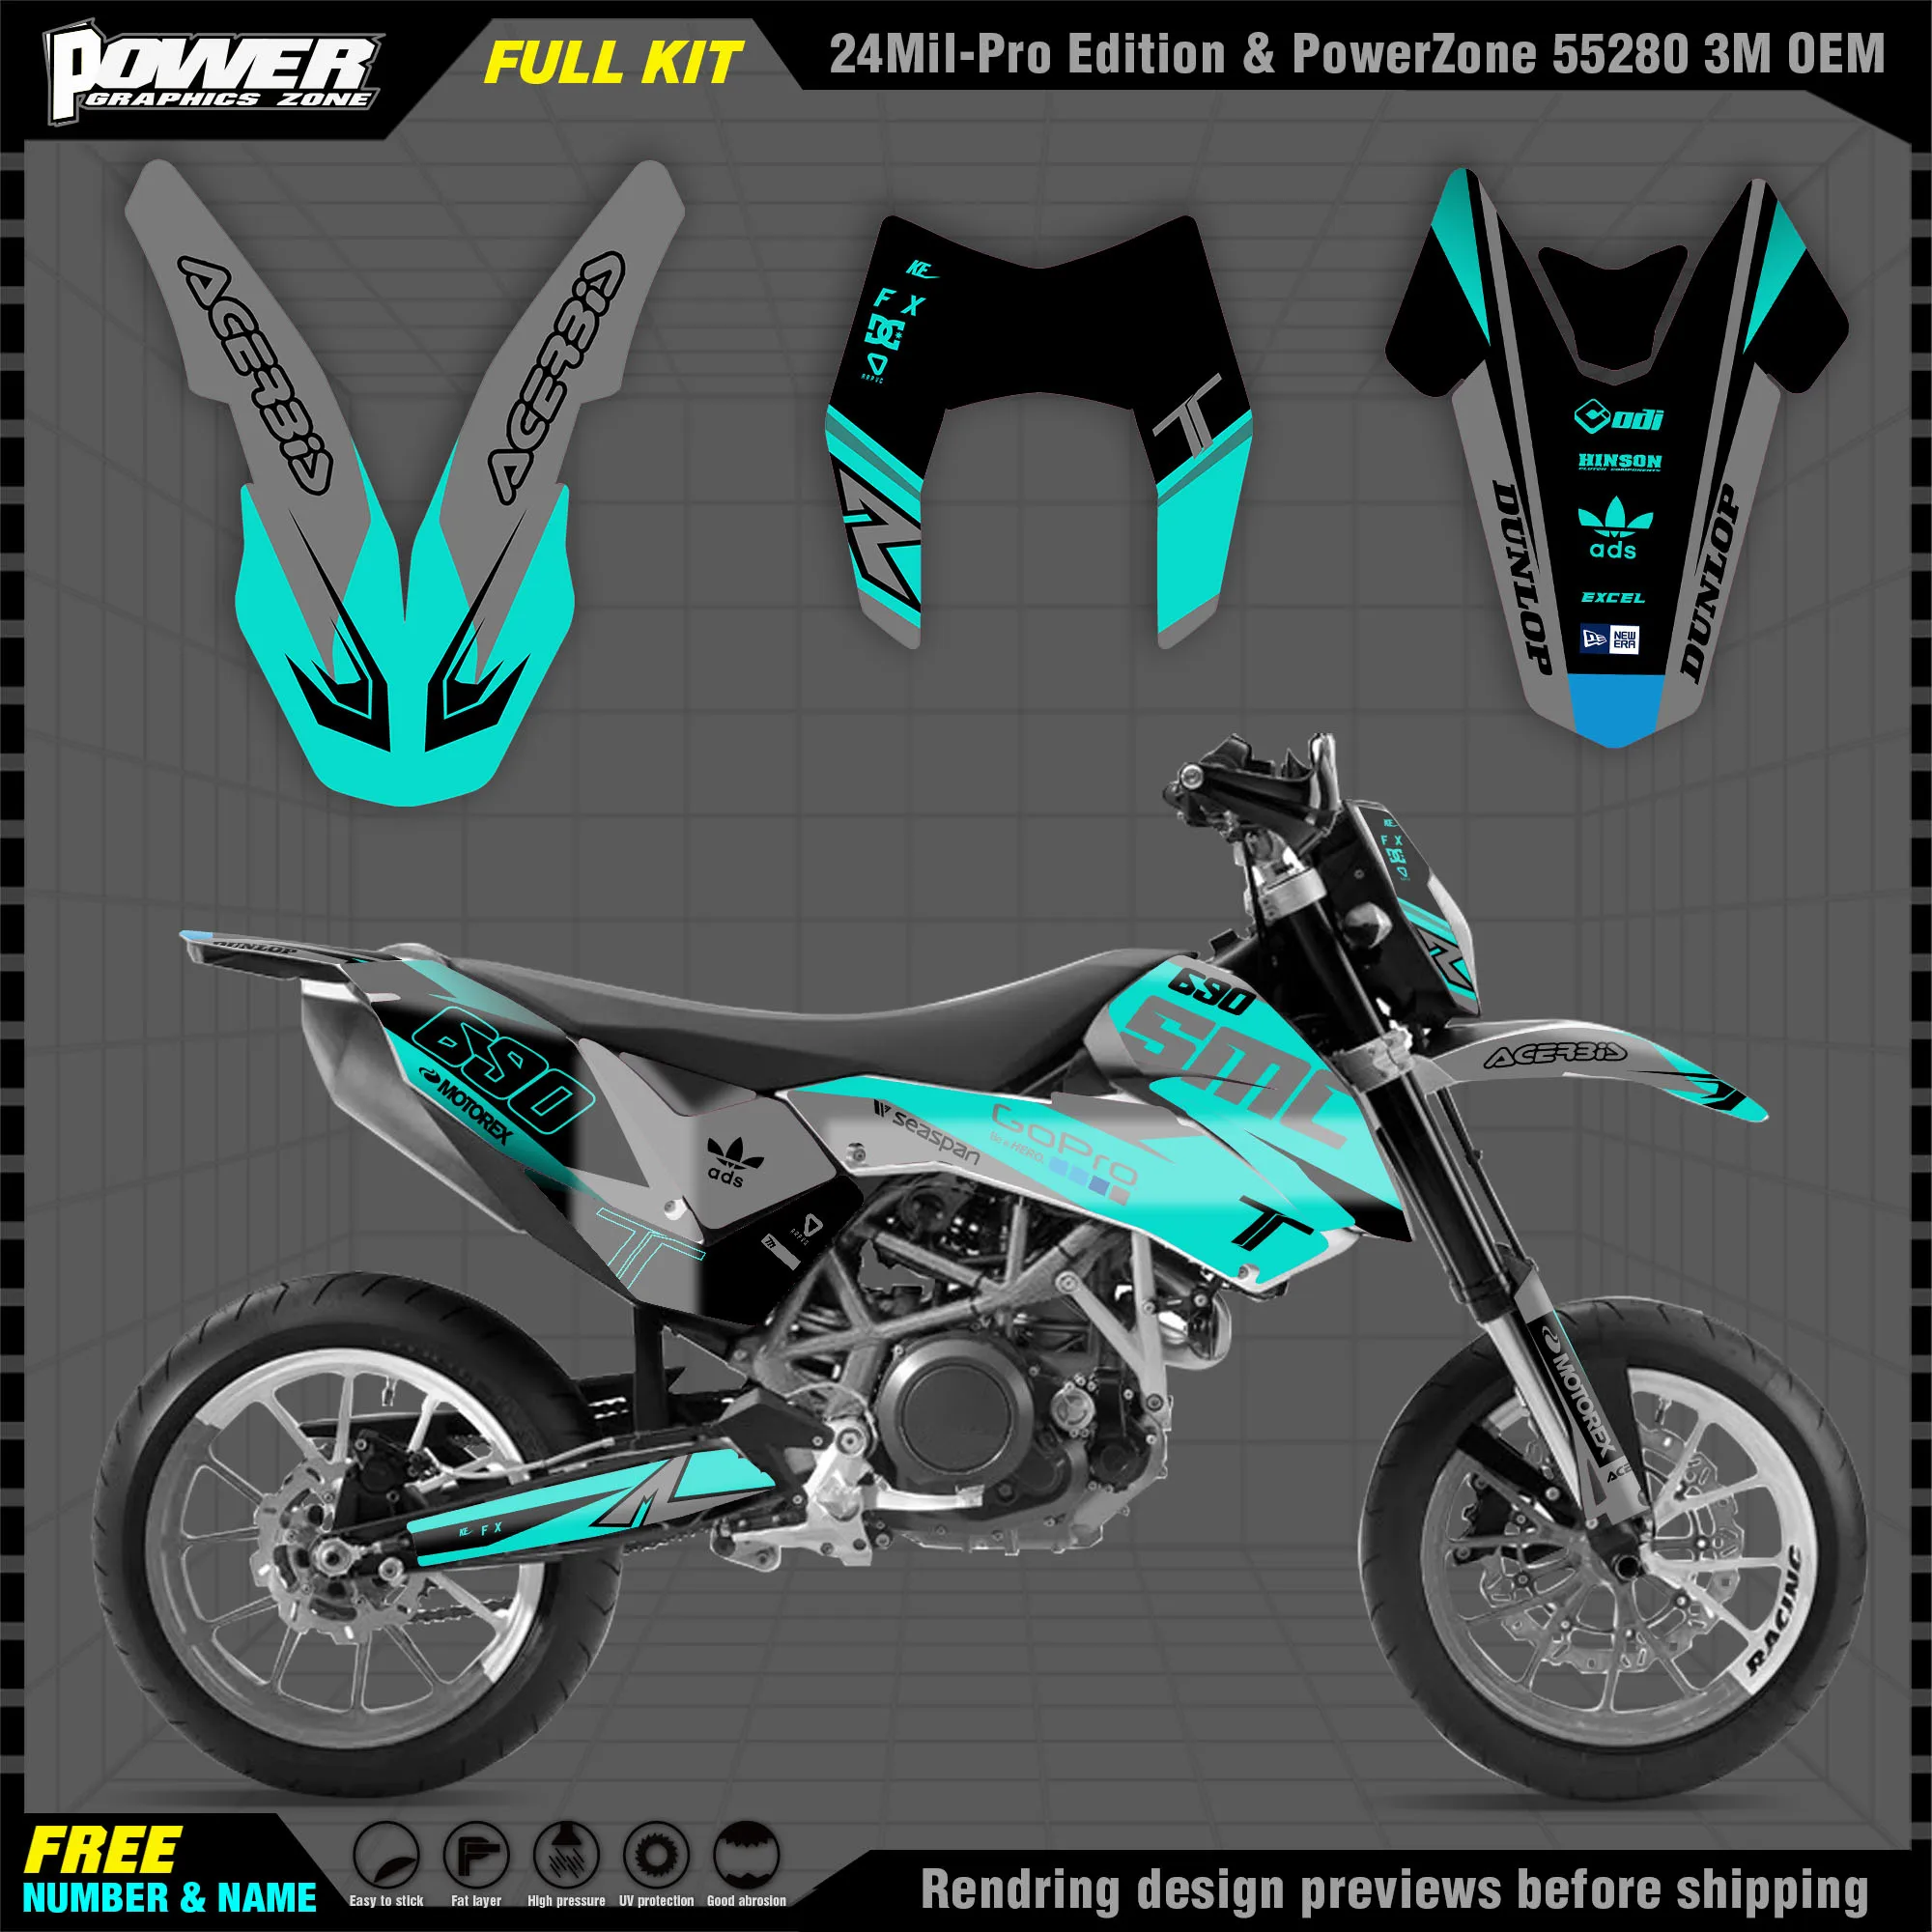 

PowerZone Custom Team Graphics Backgrounds Decals 3M Stickers Kit For KTM 2008-2011 LC4 SMC 690 005